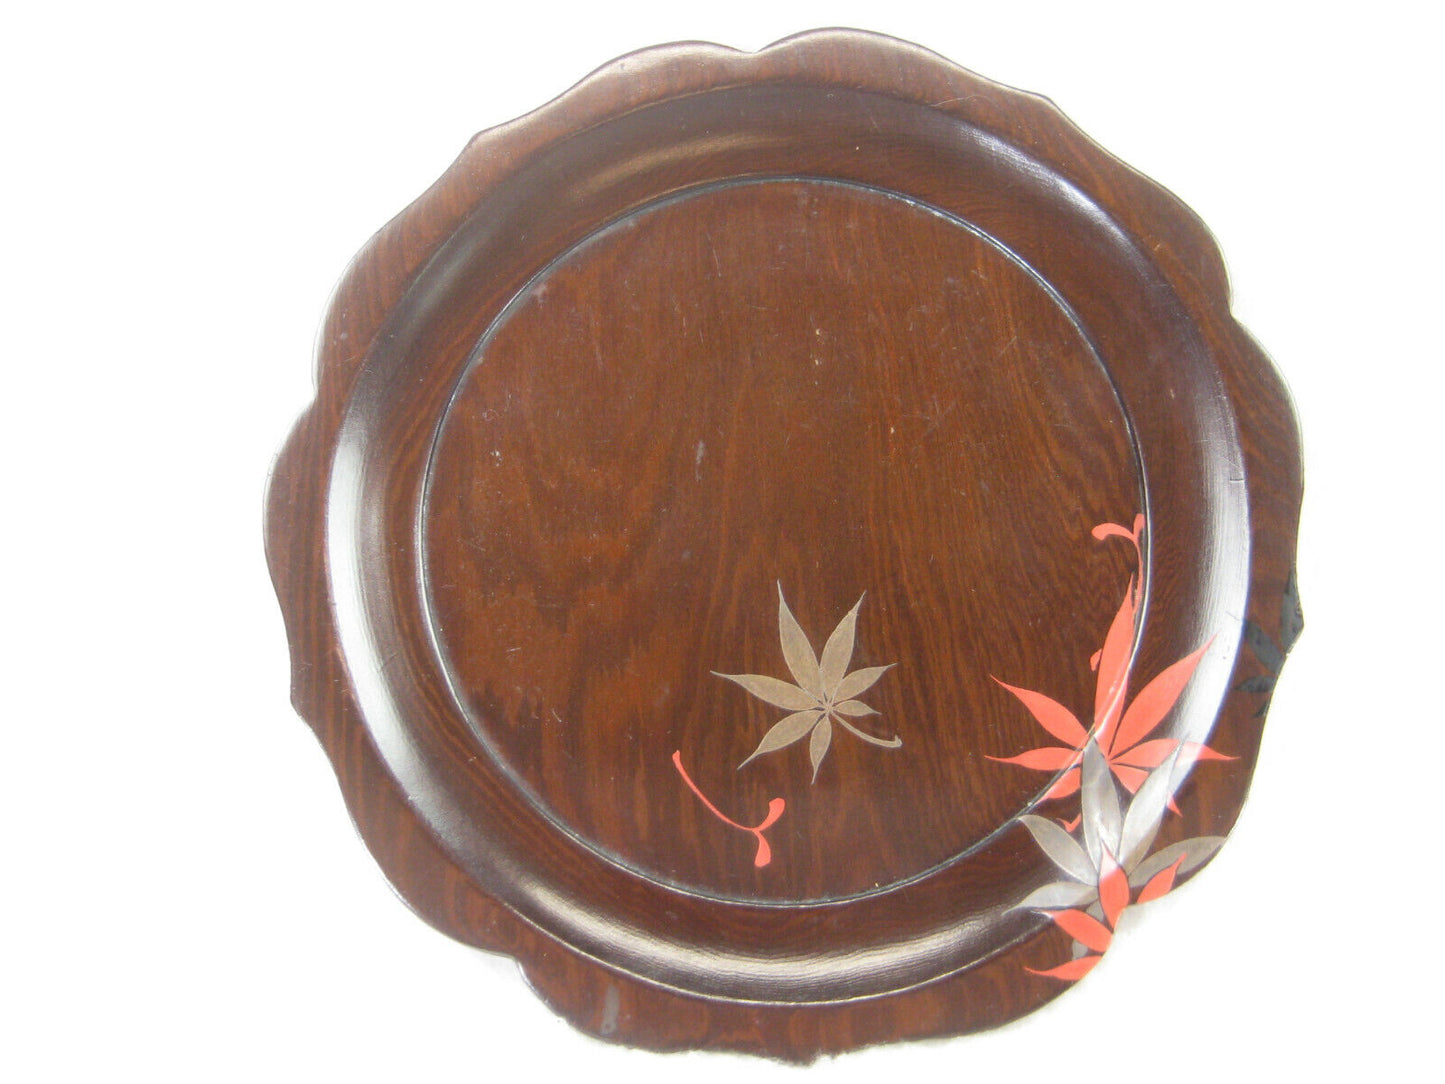 Japanese Set Of 5 Dark Wood Grain Hand Painted Maple Lacquer Small Plates 6"